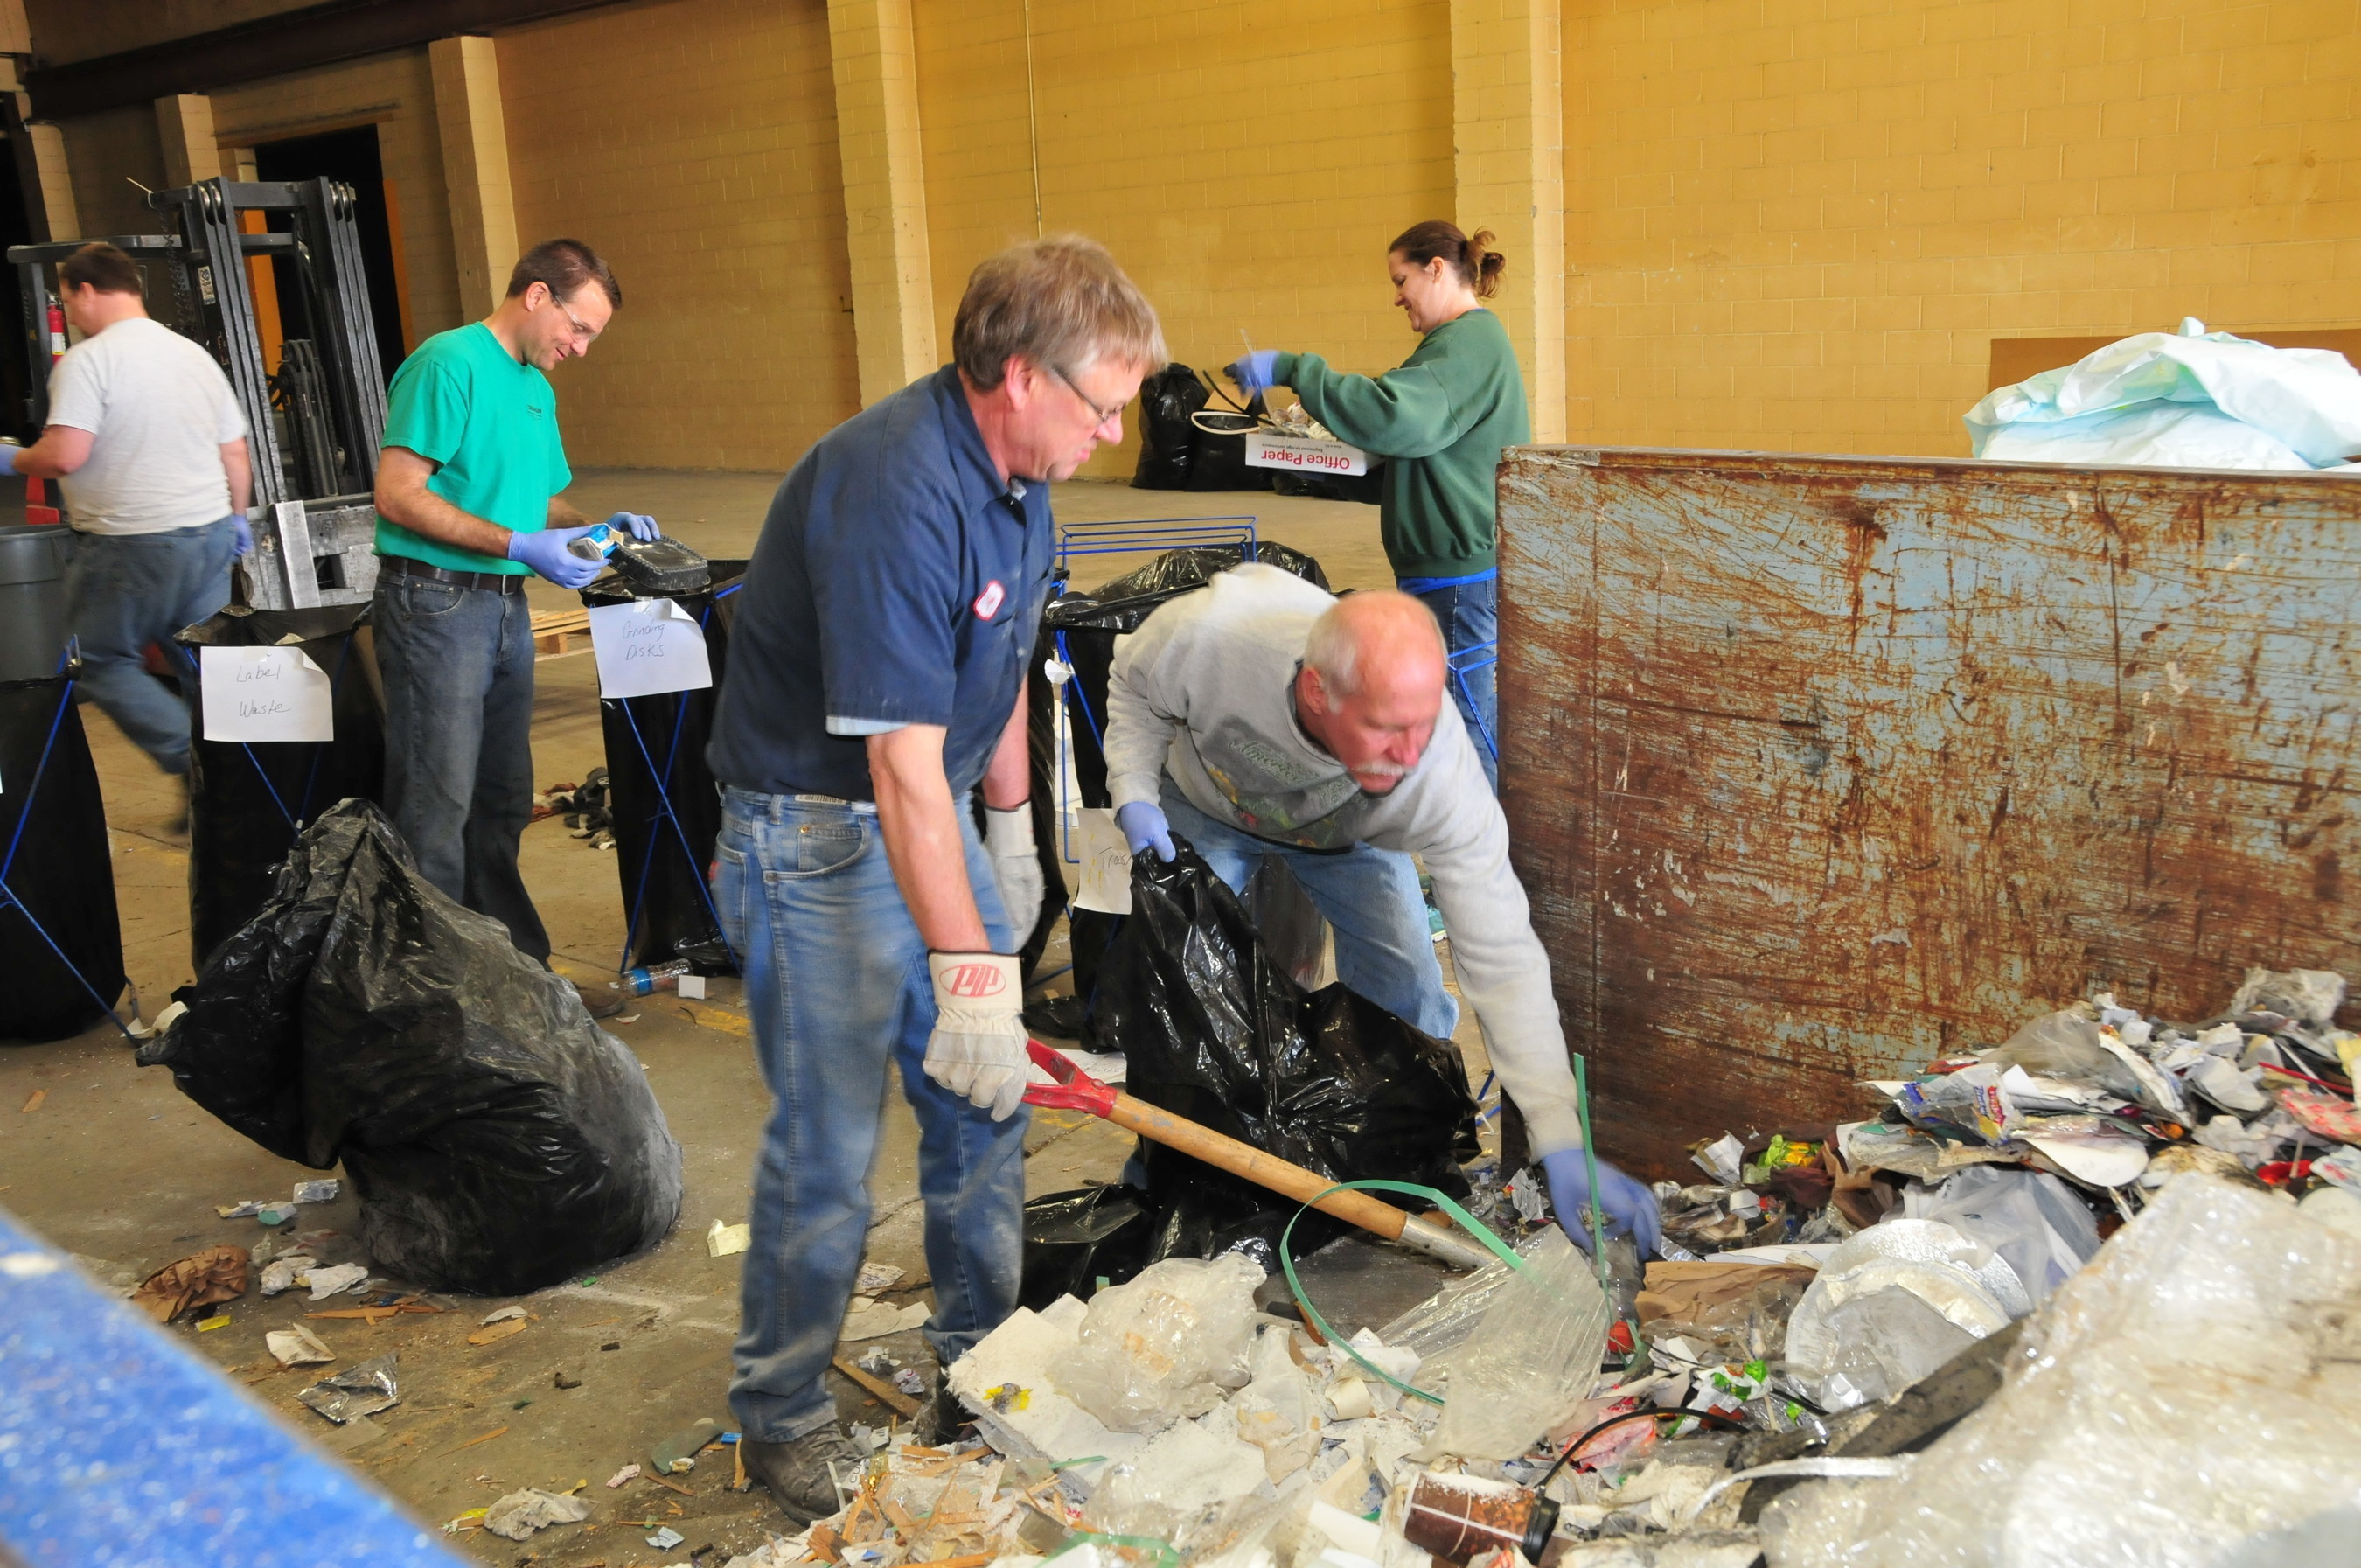 Curries employees participate in a dumpster dive to find out how they can manage their waste more responsibly.